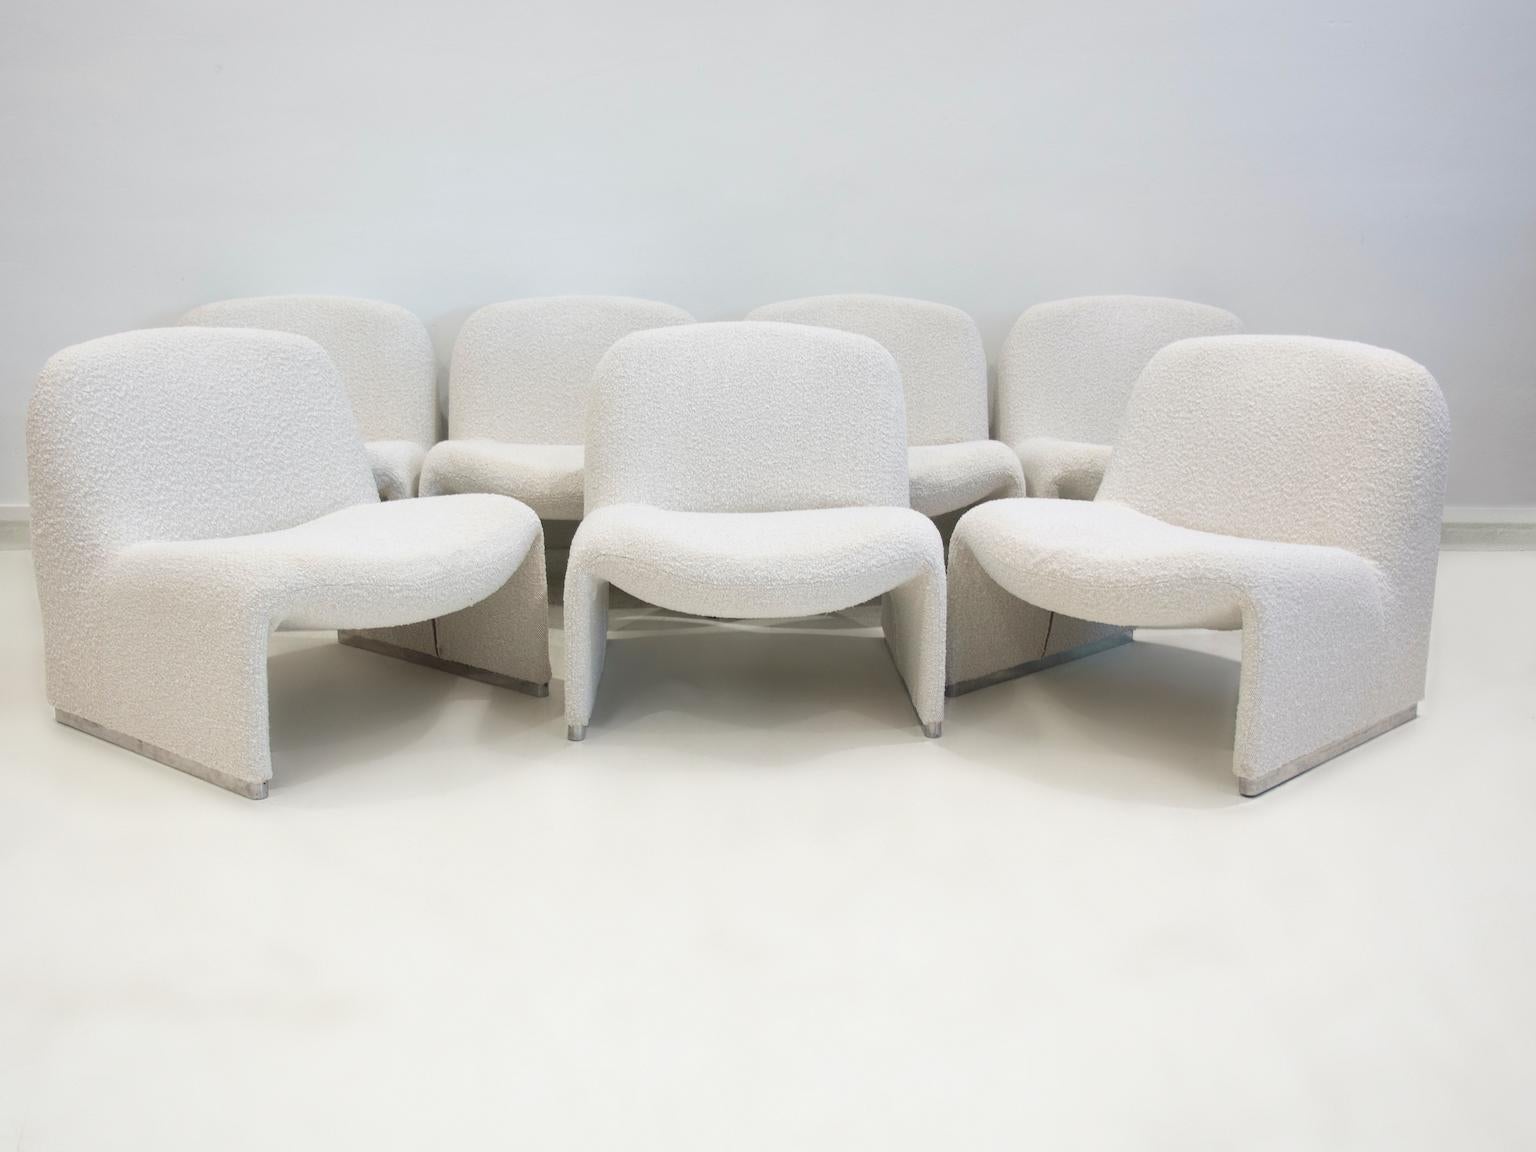 Italian Five White Bouclé Fabric Upholstered Giancarlo Piretti Alky Easy Chairs For Sale